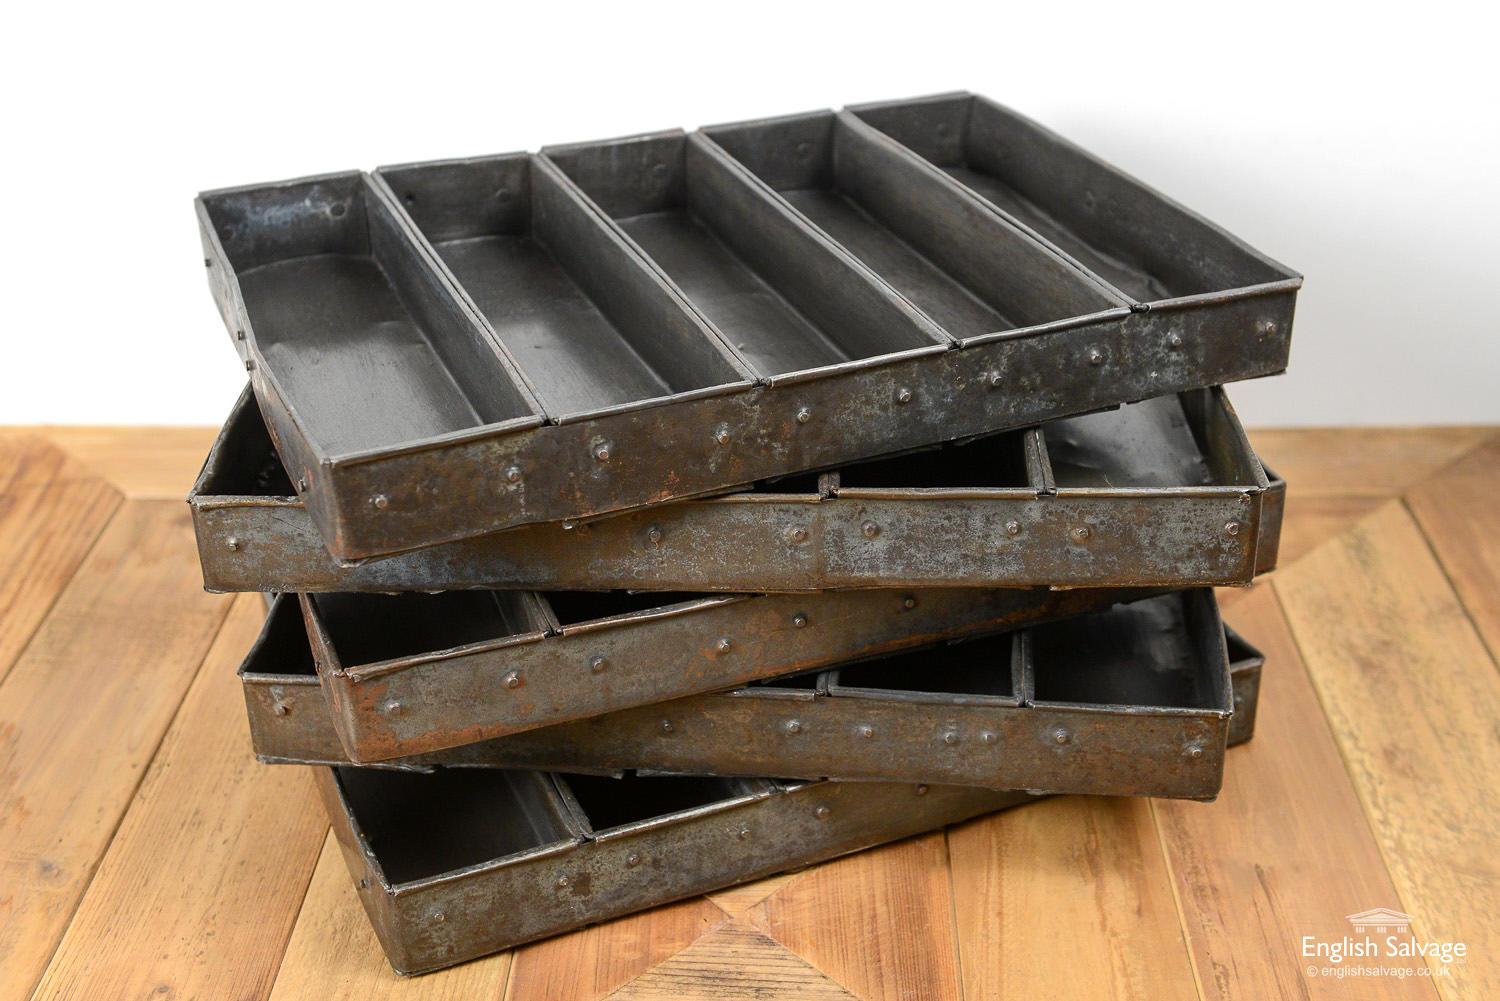 Vintage Indian bread baking trays or tins. Each has 5 sections for baking several loaves at the same time. Knocks and scratches commensurate with age and use. These could be repurposed for rustic style storage.